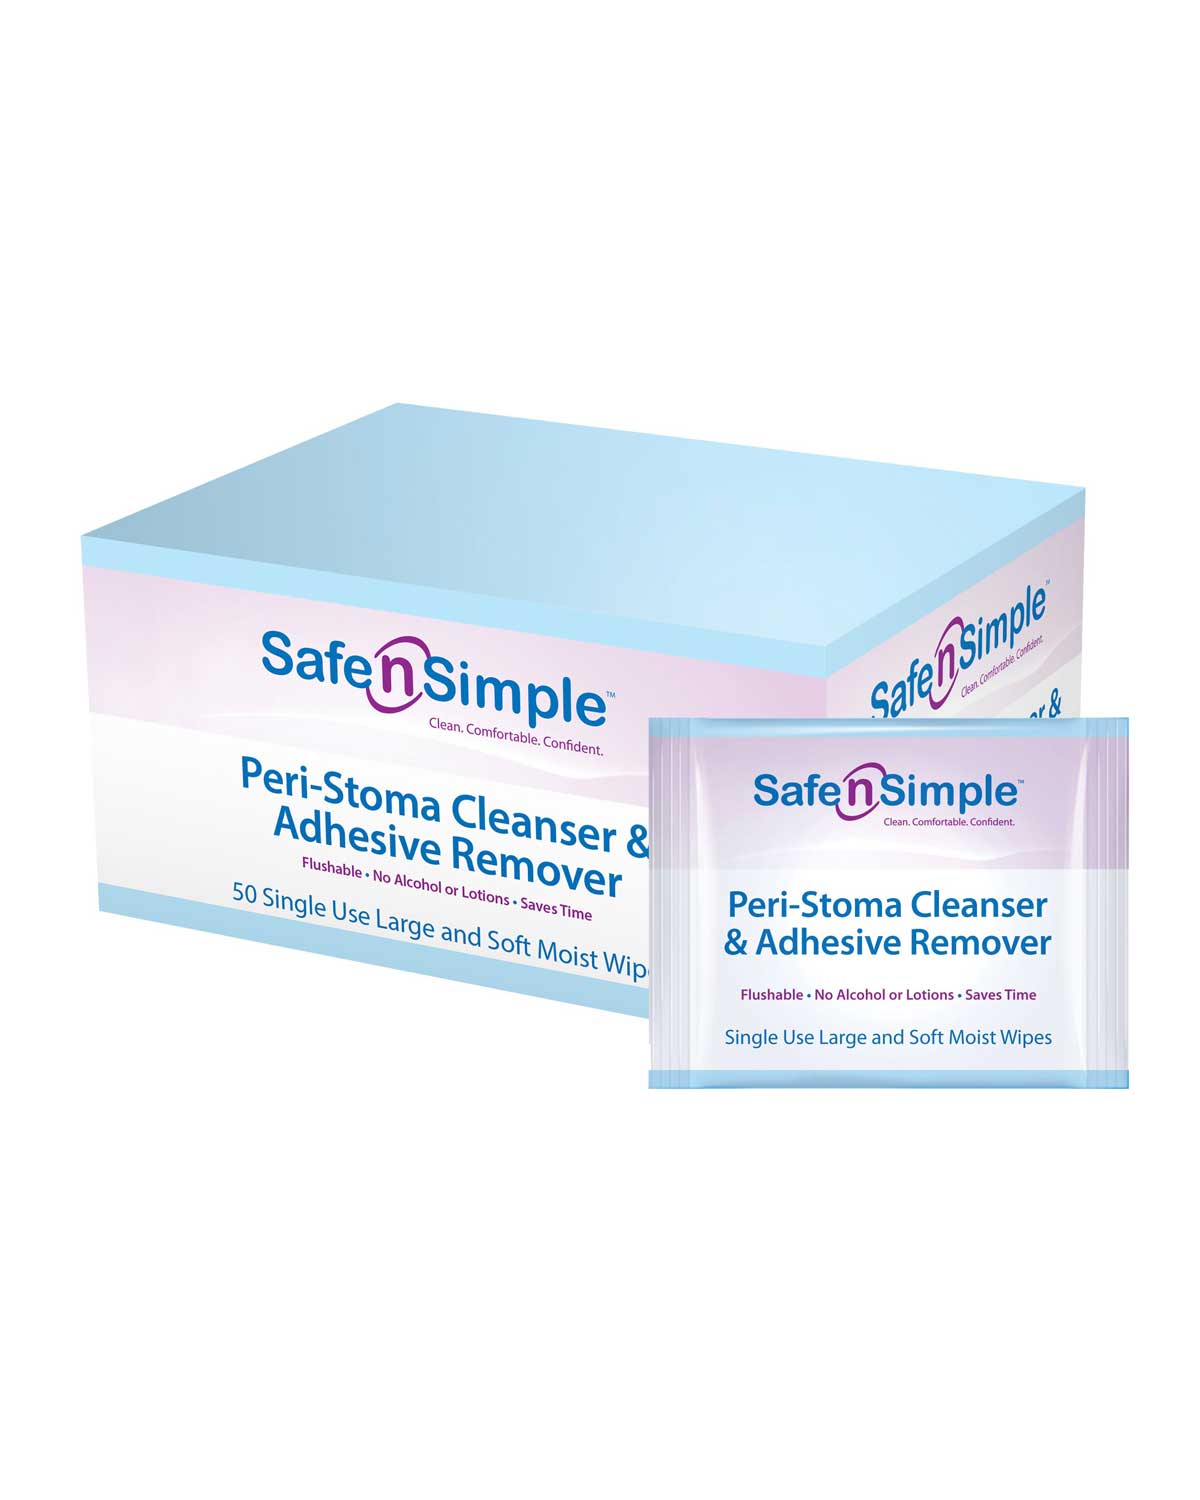 Safe n Simple Peri-Stoma Cleanser & Adhesive Remover, (50/PACKAGE) - 0